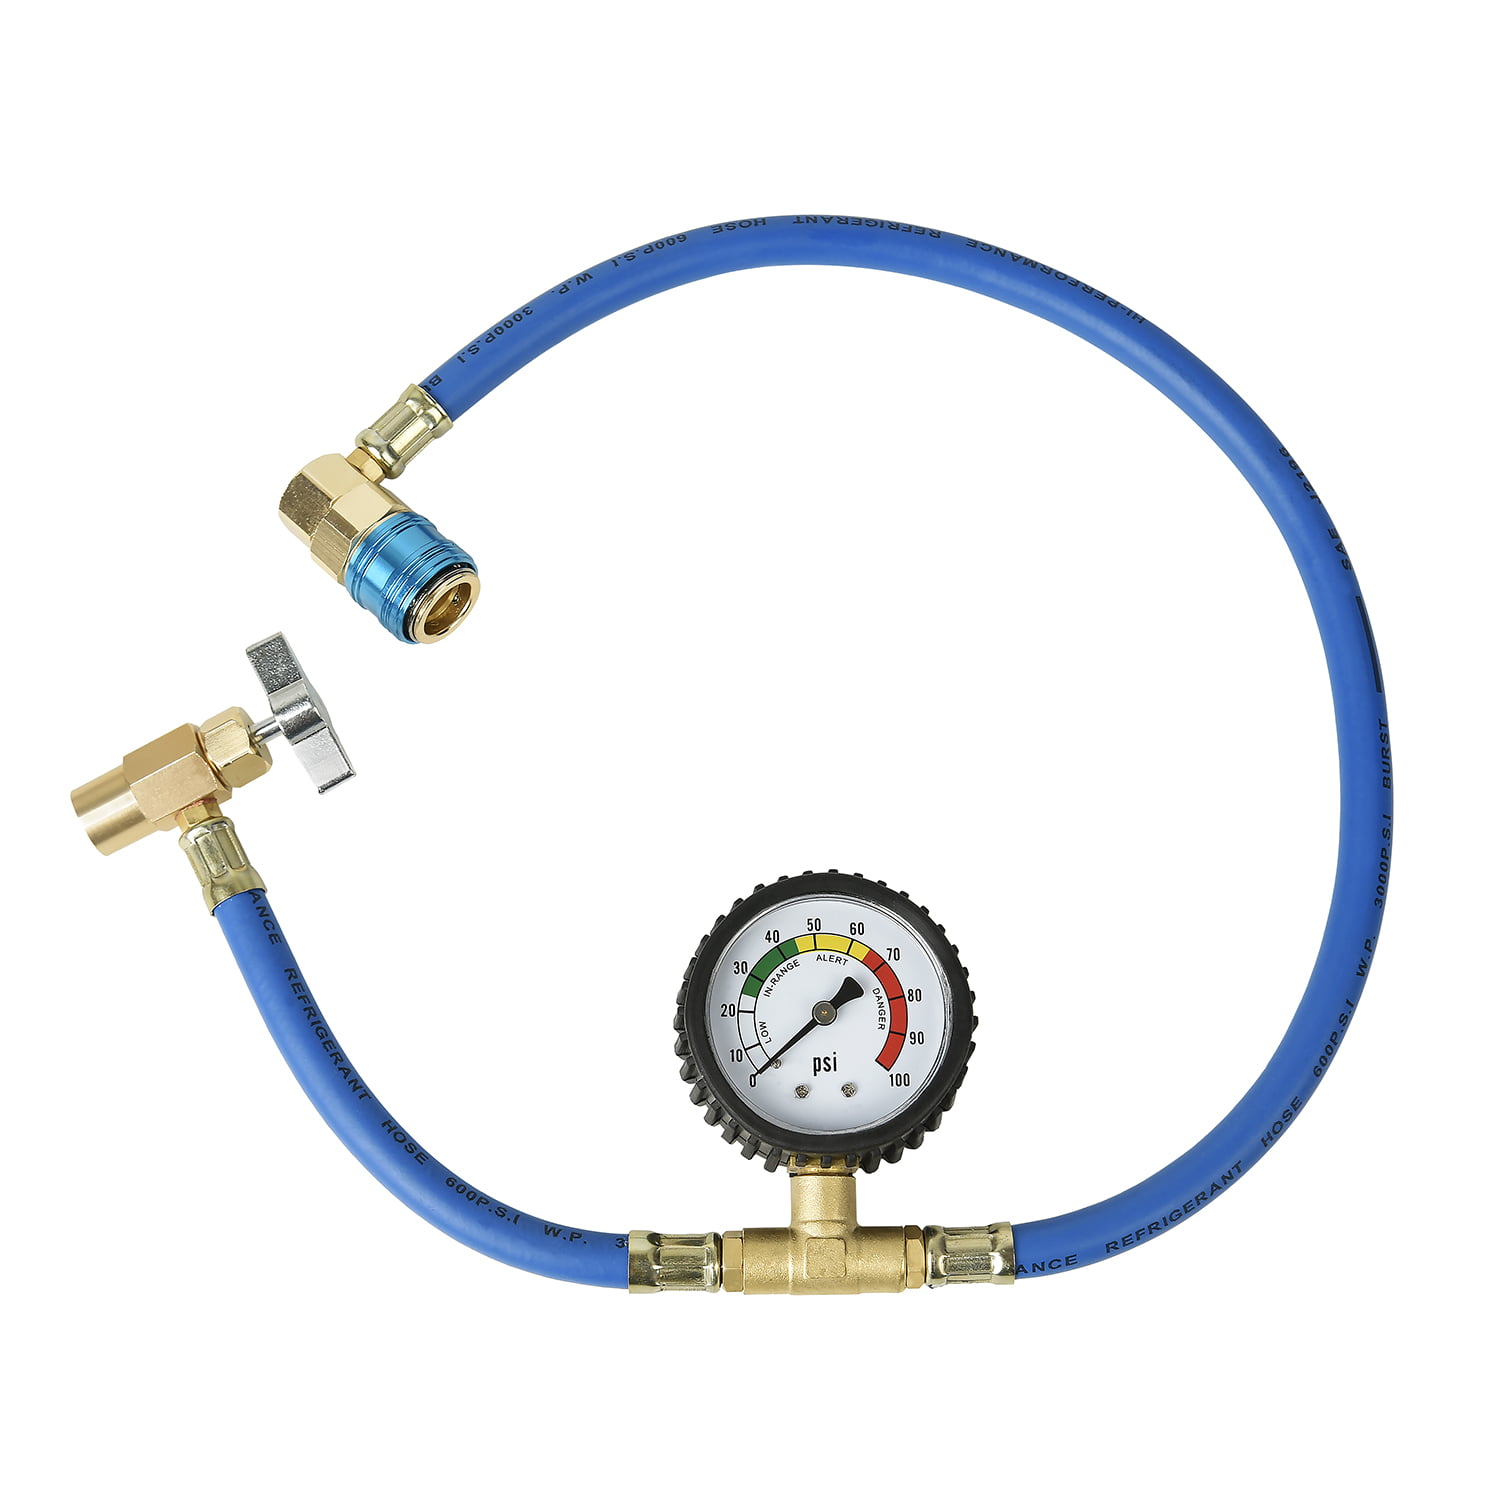 Aain LX1383 Car A/C Refrigerant Pro R-134A Heavy Duty Charging Hose/Air Conditioning Low Pressure Gauge 